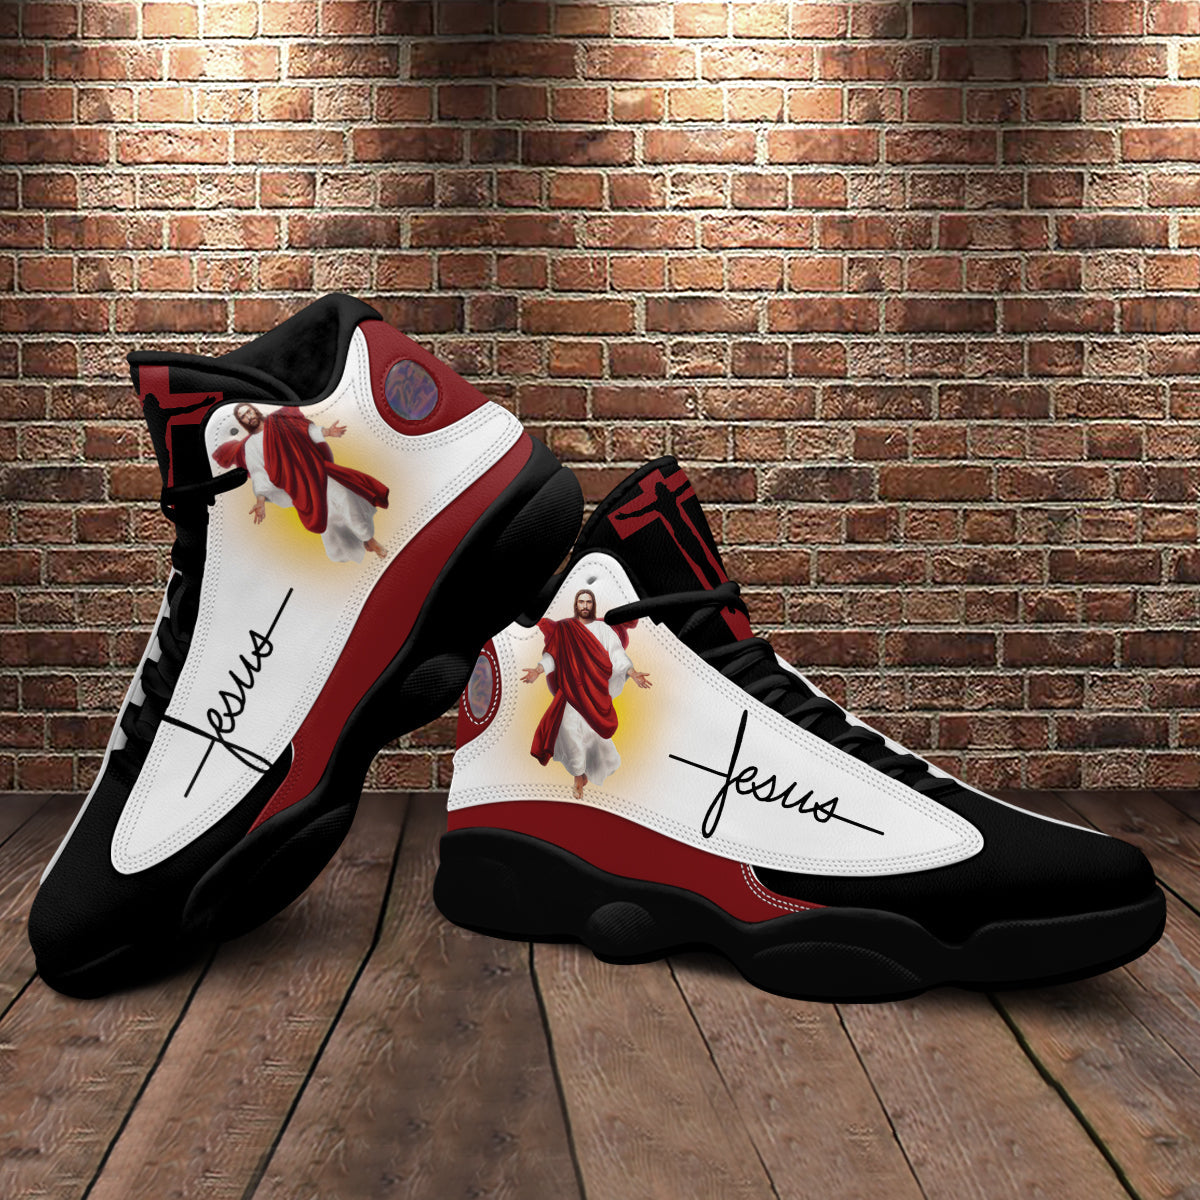 Walk By Faith Jesus And Lion Art Basketball Shoes For Men Women - Christian Shoes - Jesus Shoes - Unisex Basketball Shoes